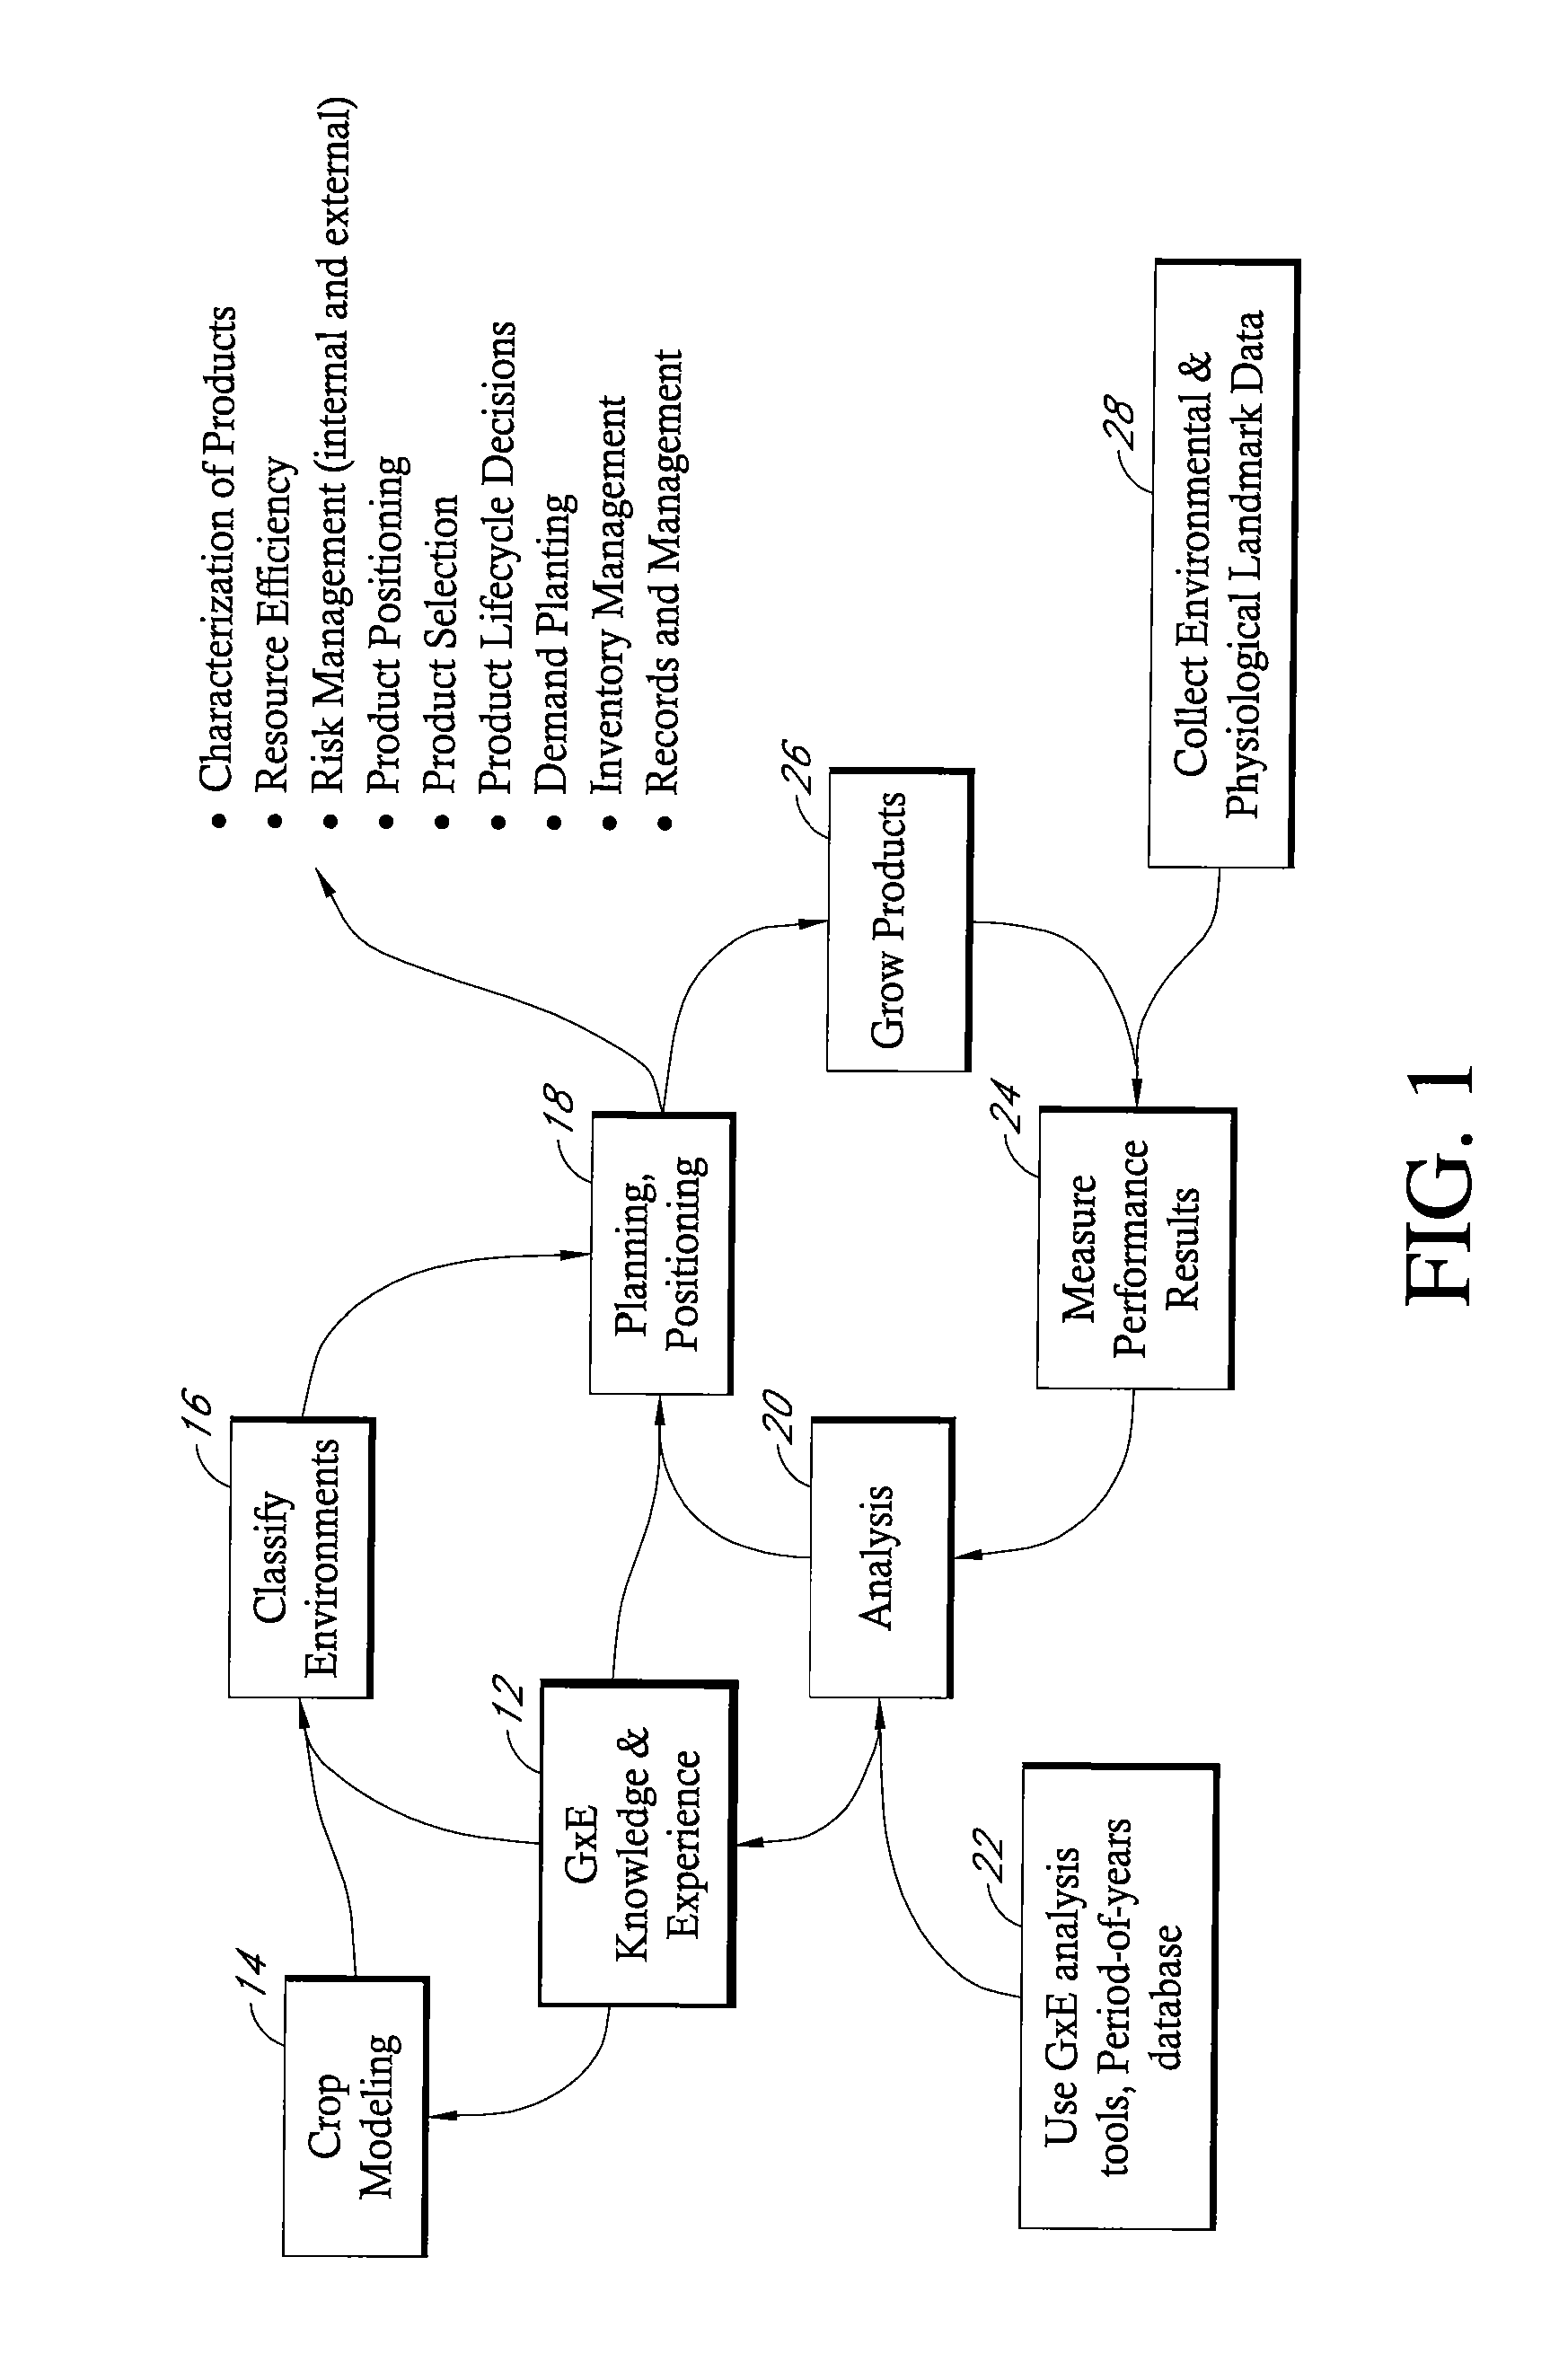 Method for using environmental classification to assist in financial management and services